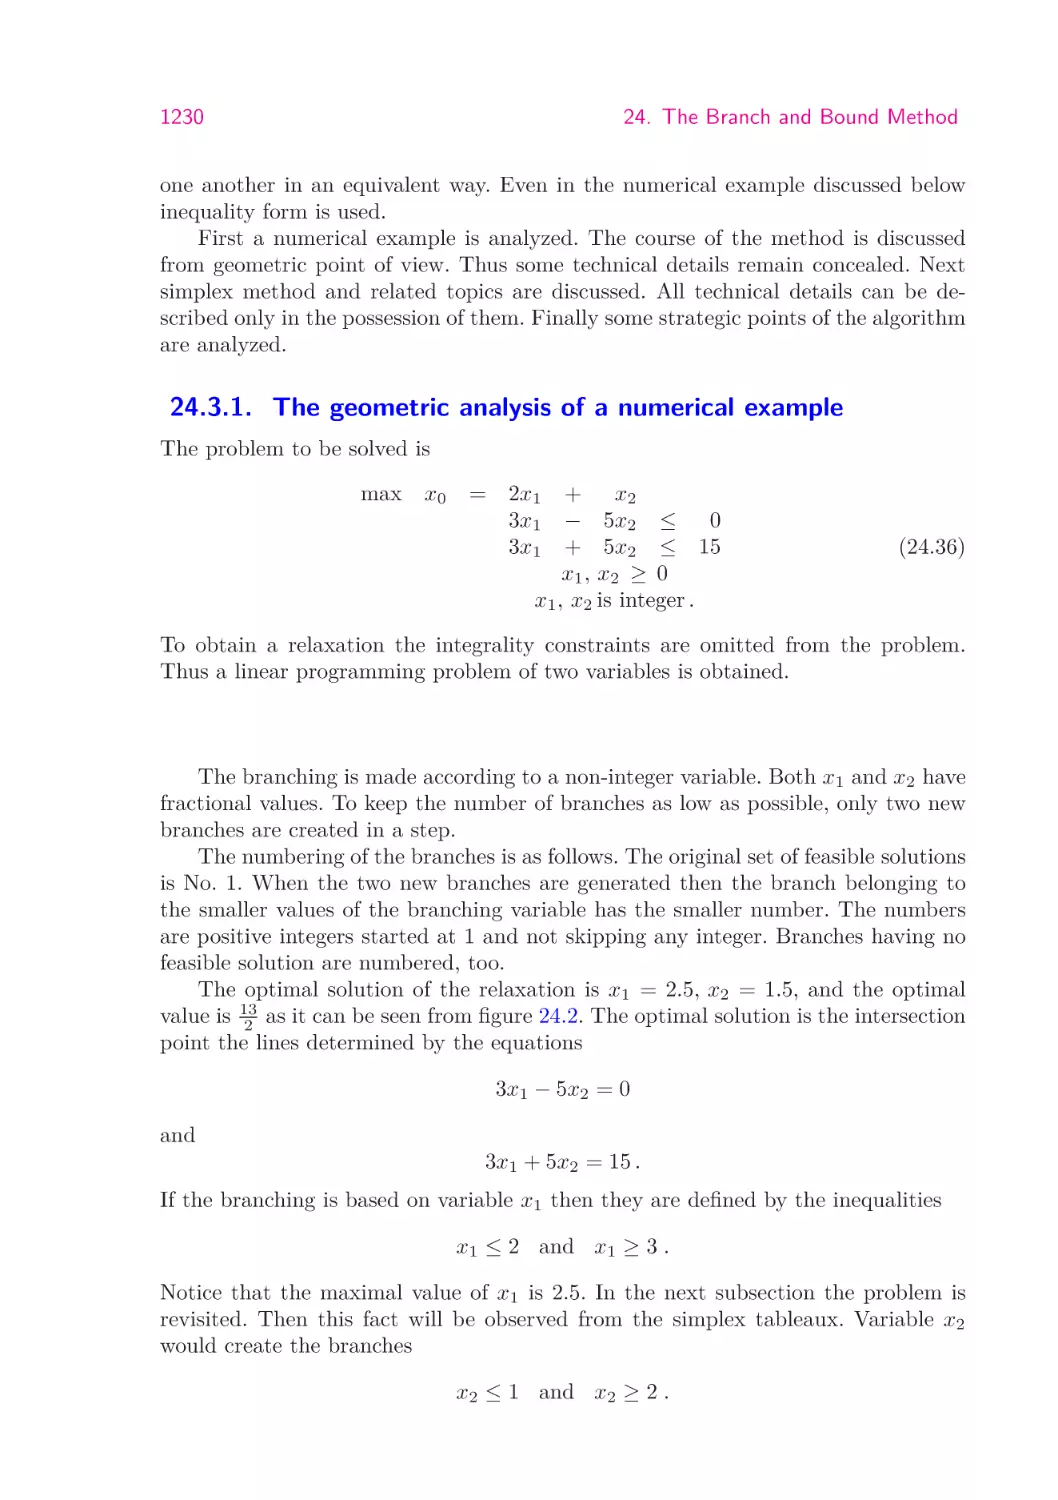 24.3.1.  The geometric analysis of a numerical example